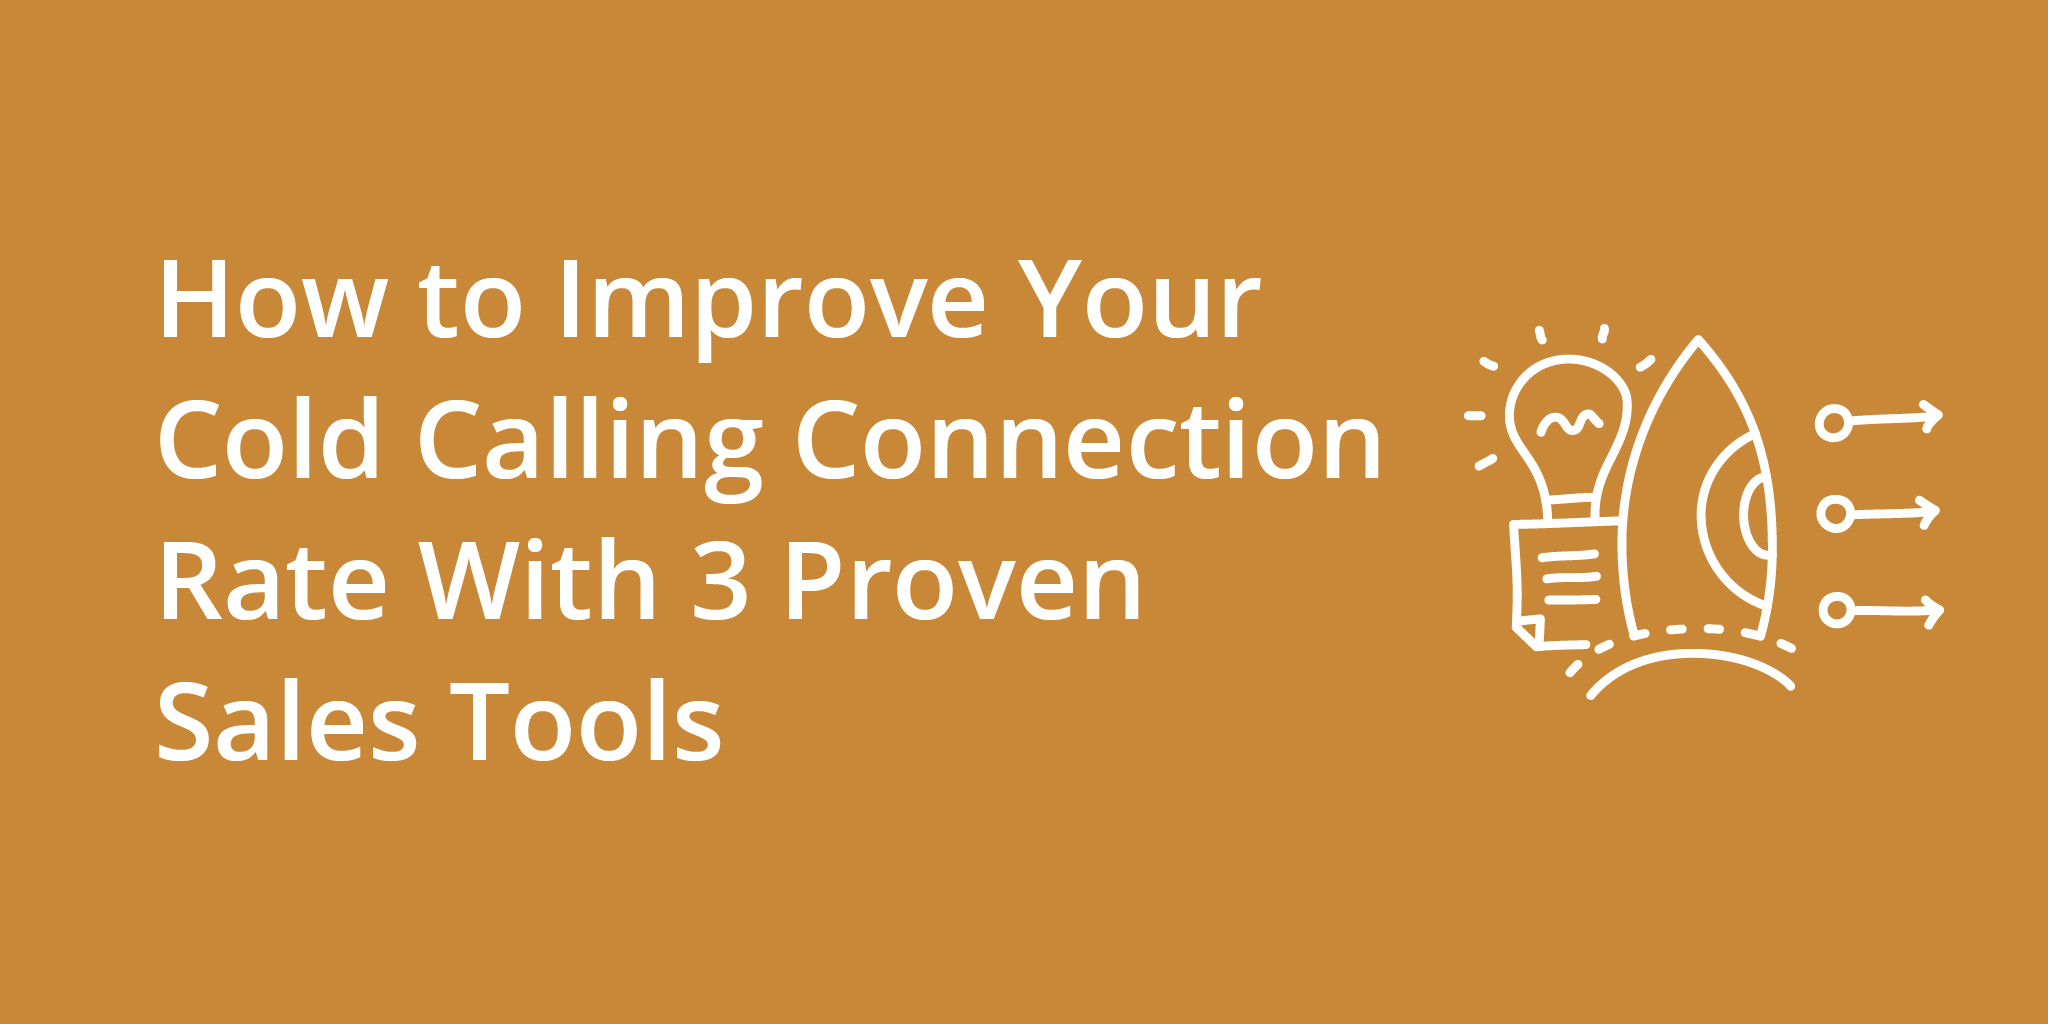 How to Improve Your Cold Calling Connection Rate With 3 Proven Sales Tools